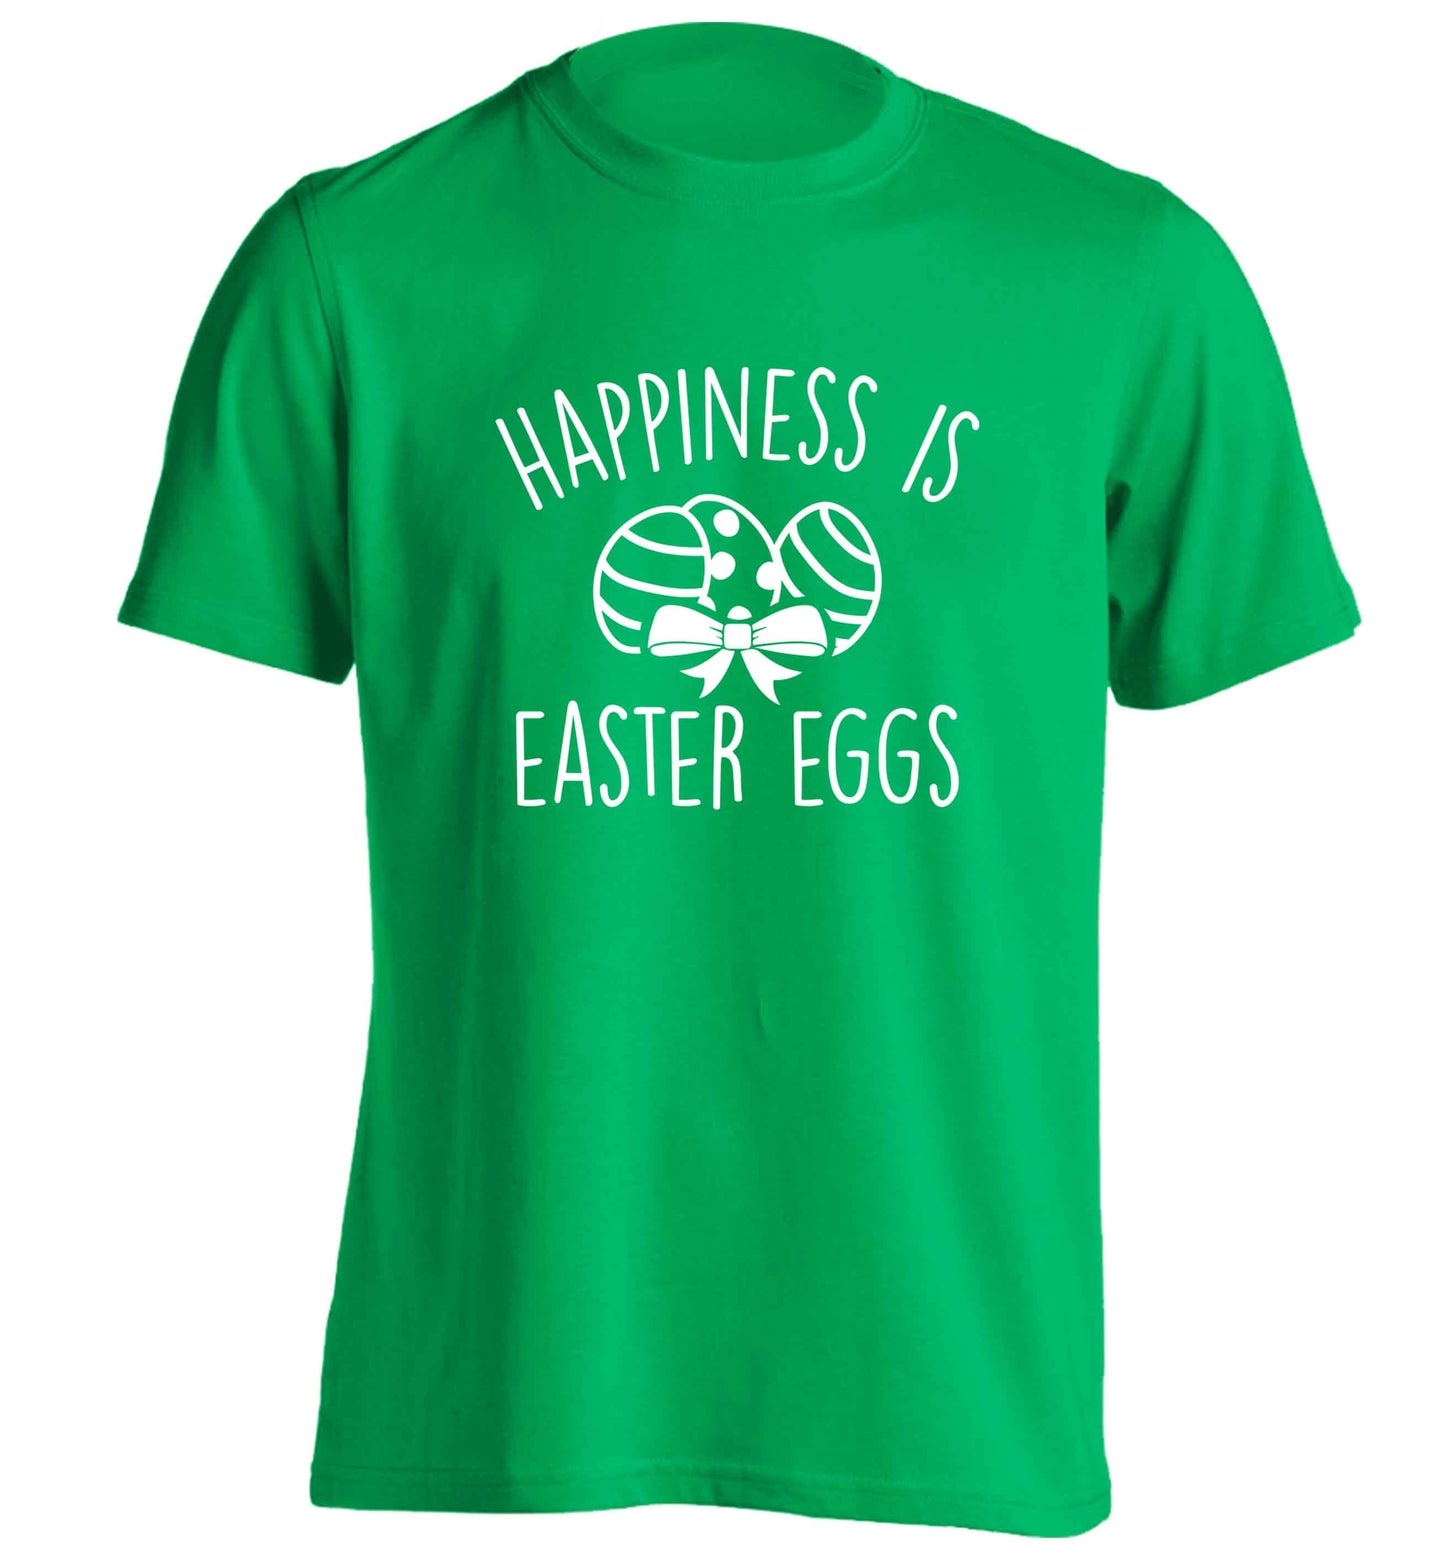 Happiness is Easter eggs adults unisex green Tshirt 2XL